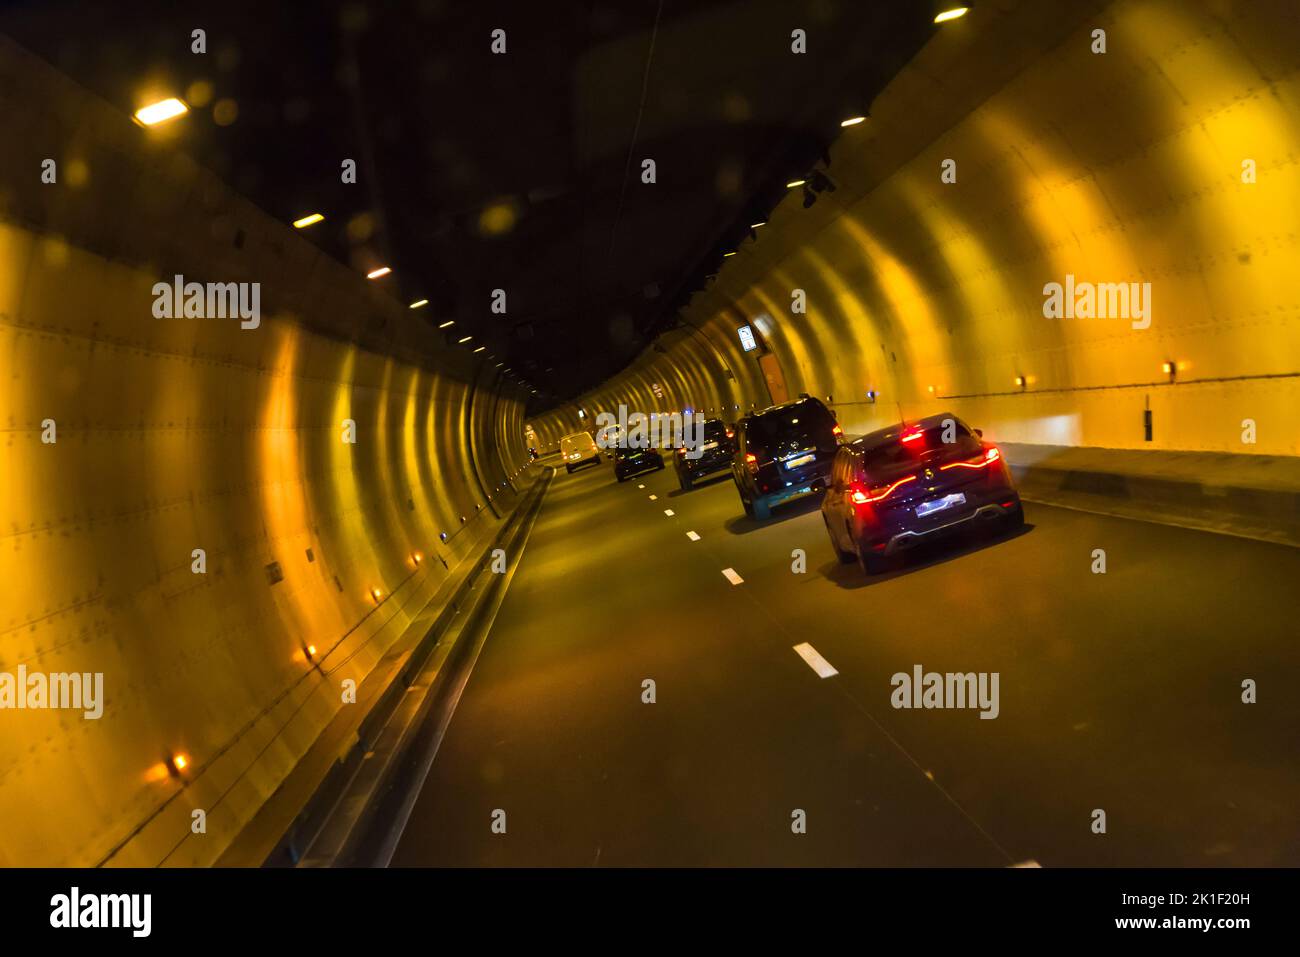 Motorway with cars driving through a tunnel, France Stock Photo